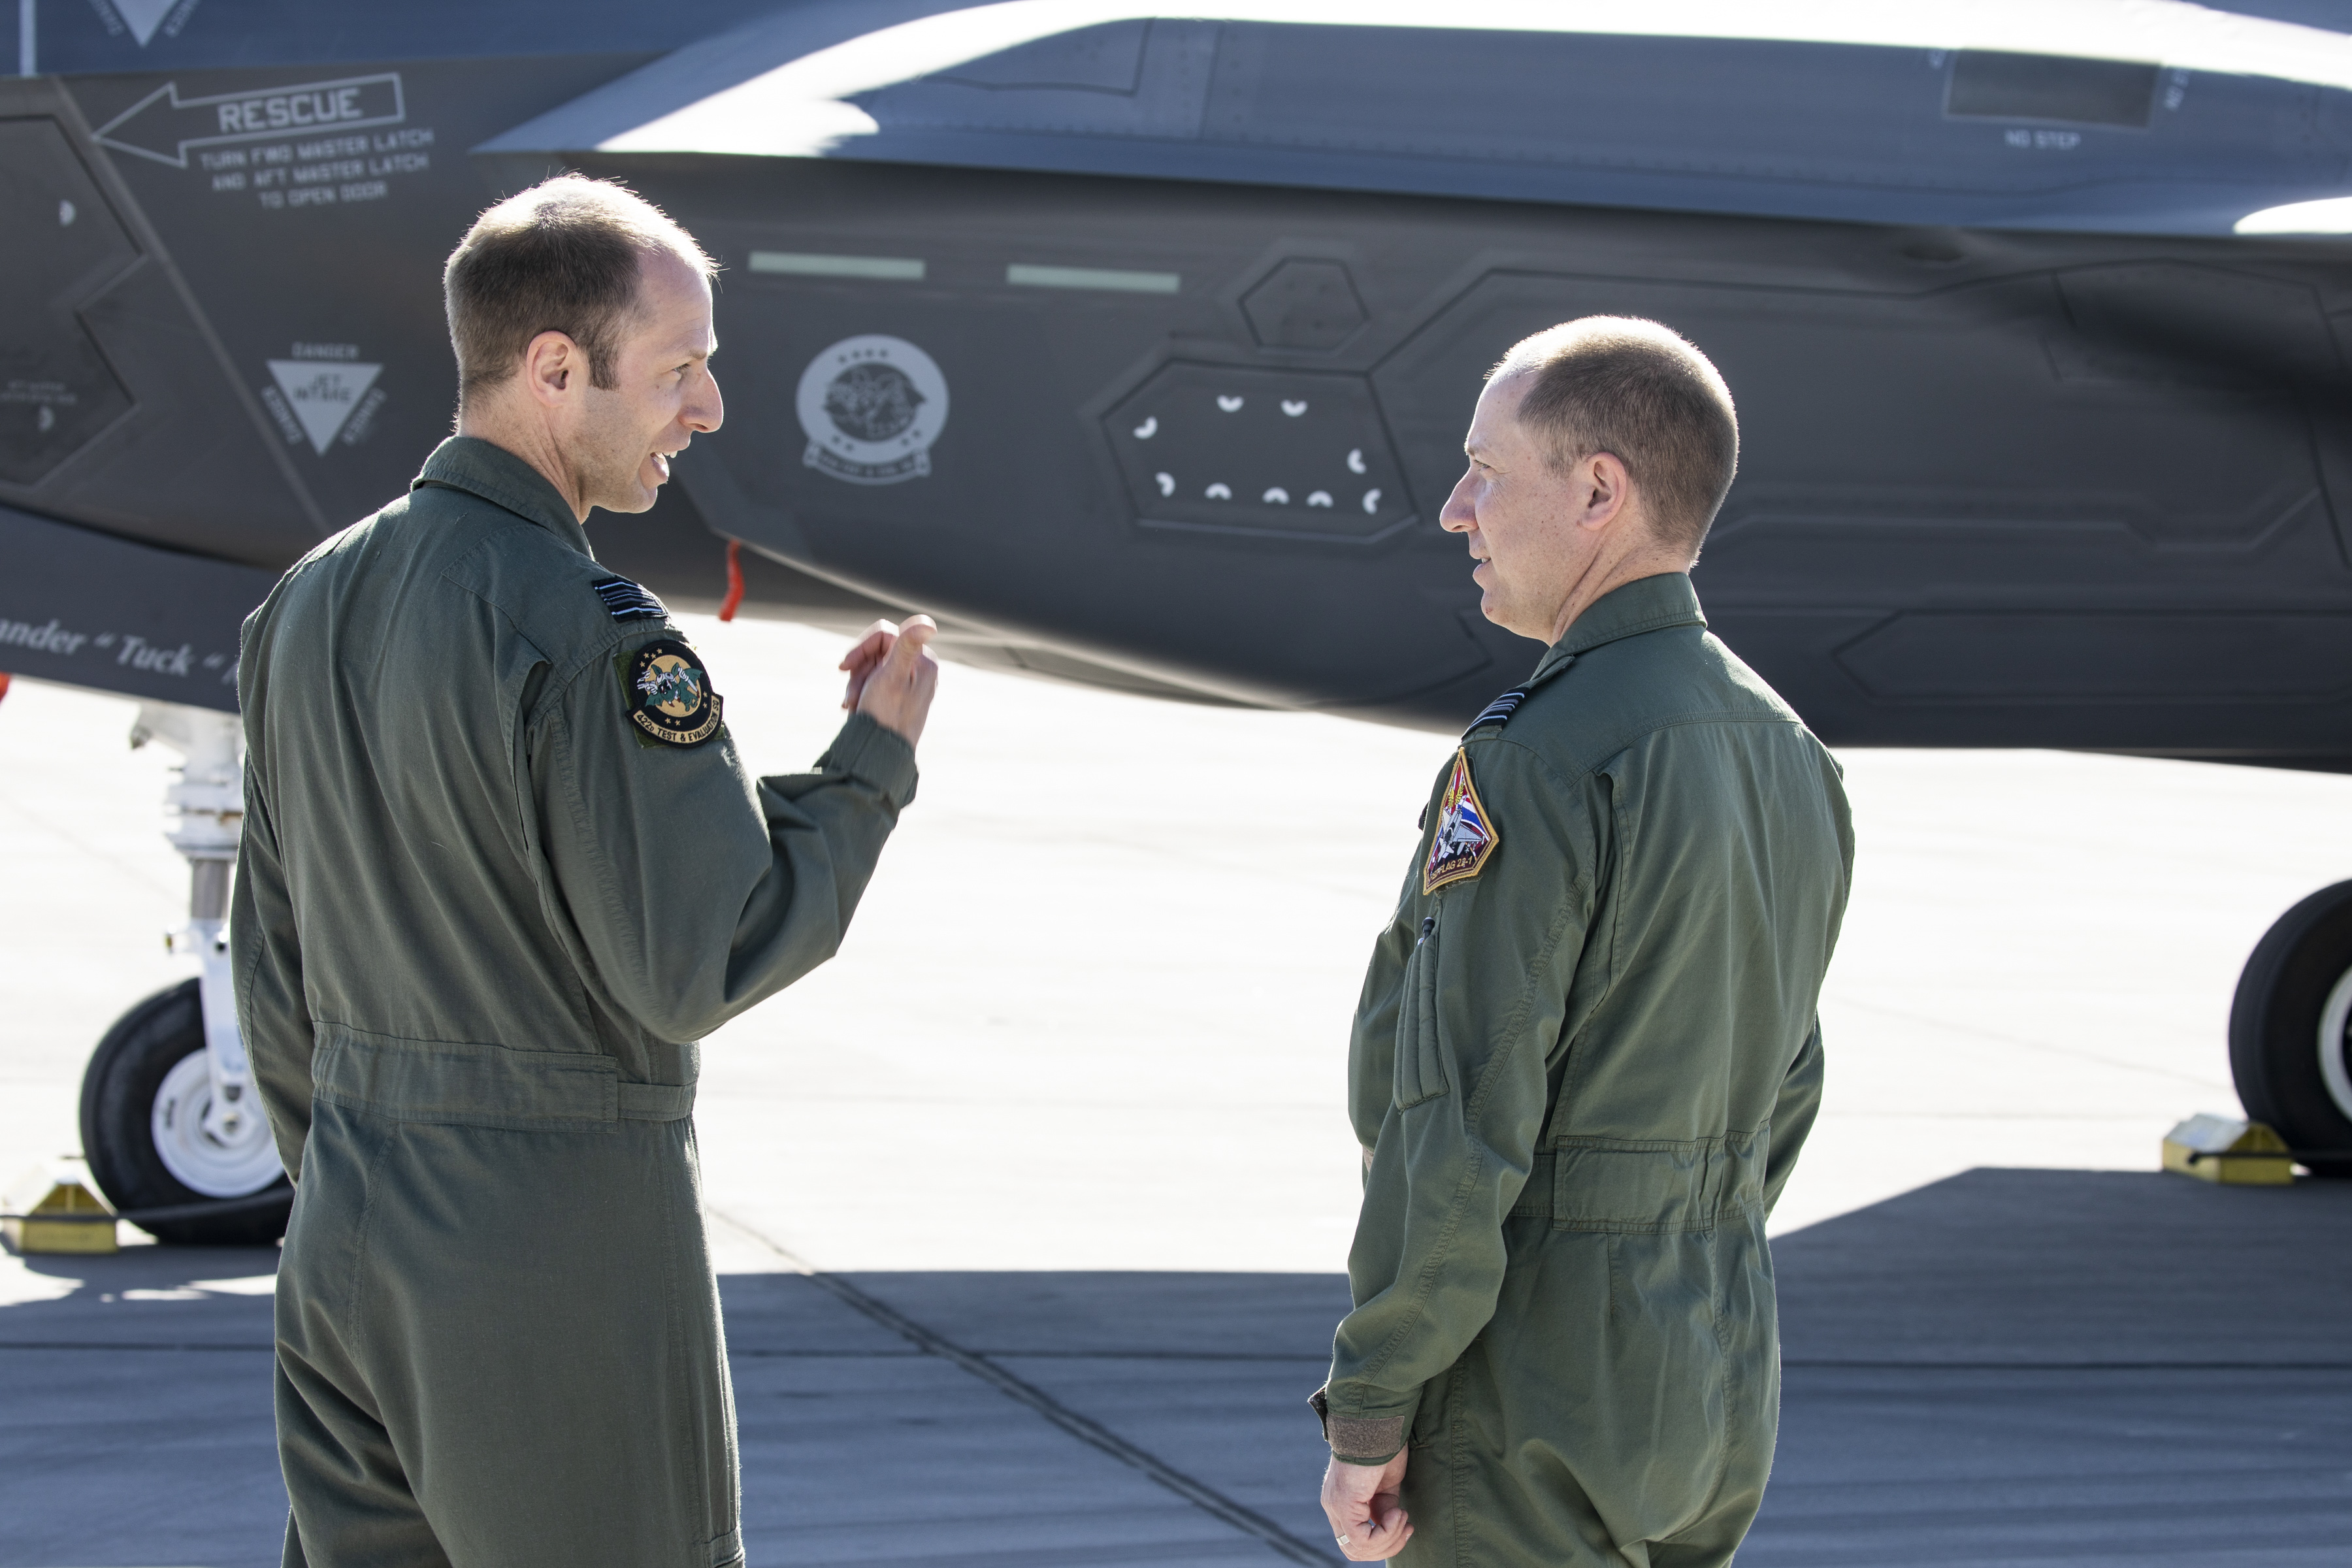 Two RAF Pilots on the airfield with a United States Air Force F-35 A jet.